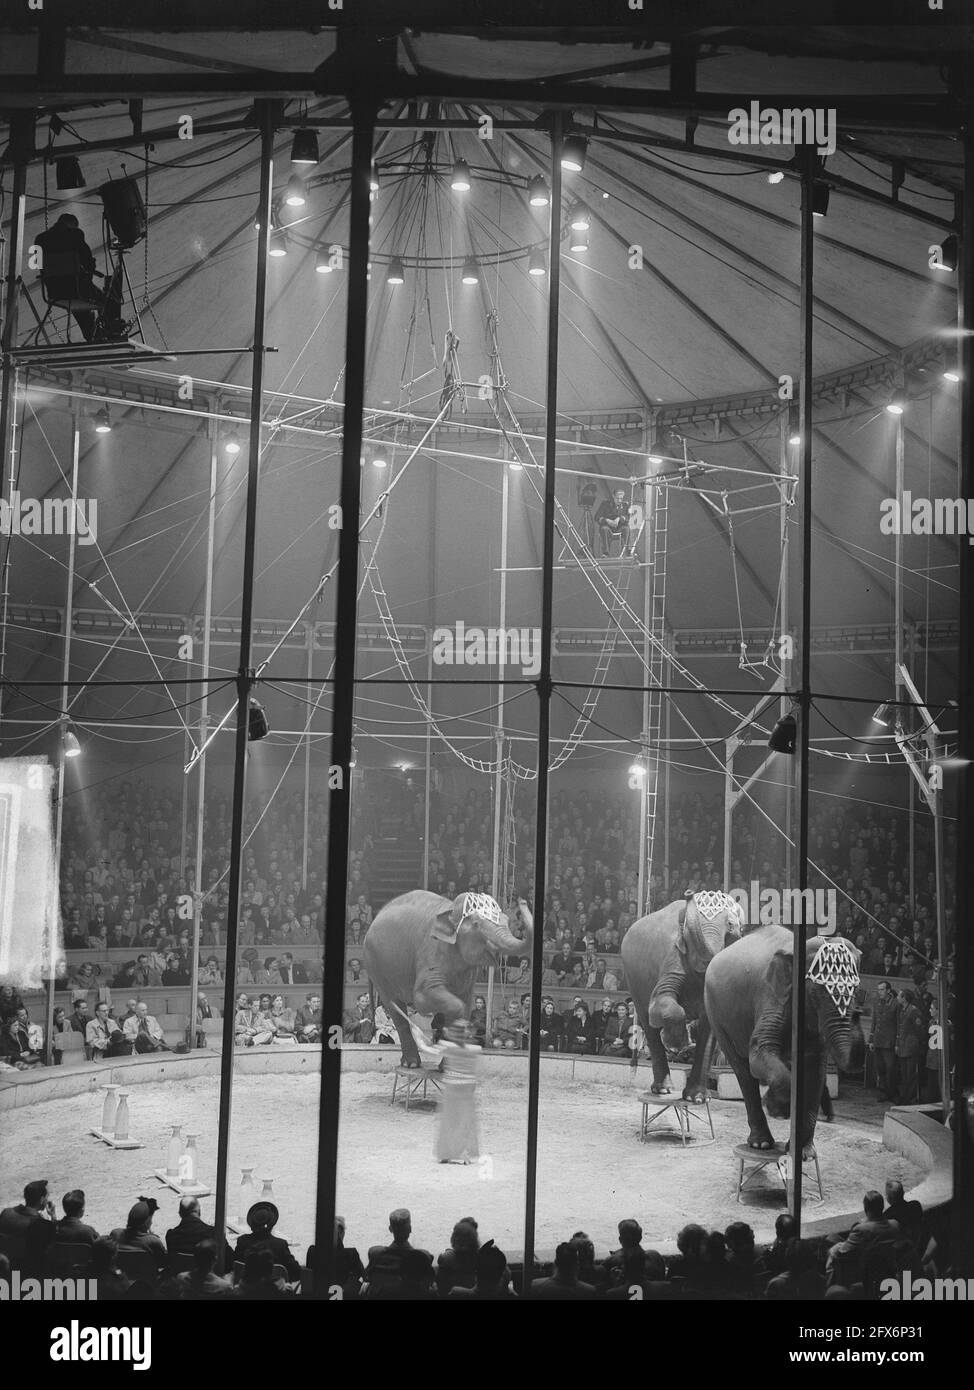 Circus Mikkenie, May 26, 1949, The Netherlands, 20th century press agency photo, news to remember, documentary, historic photography 1945-1990, visual stories, human history of the Twentieth Century, capturing moments in time Stock Photo